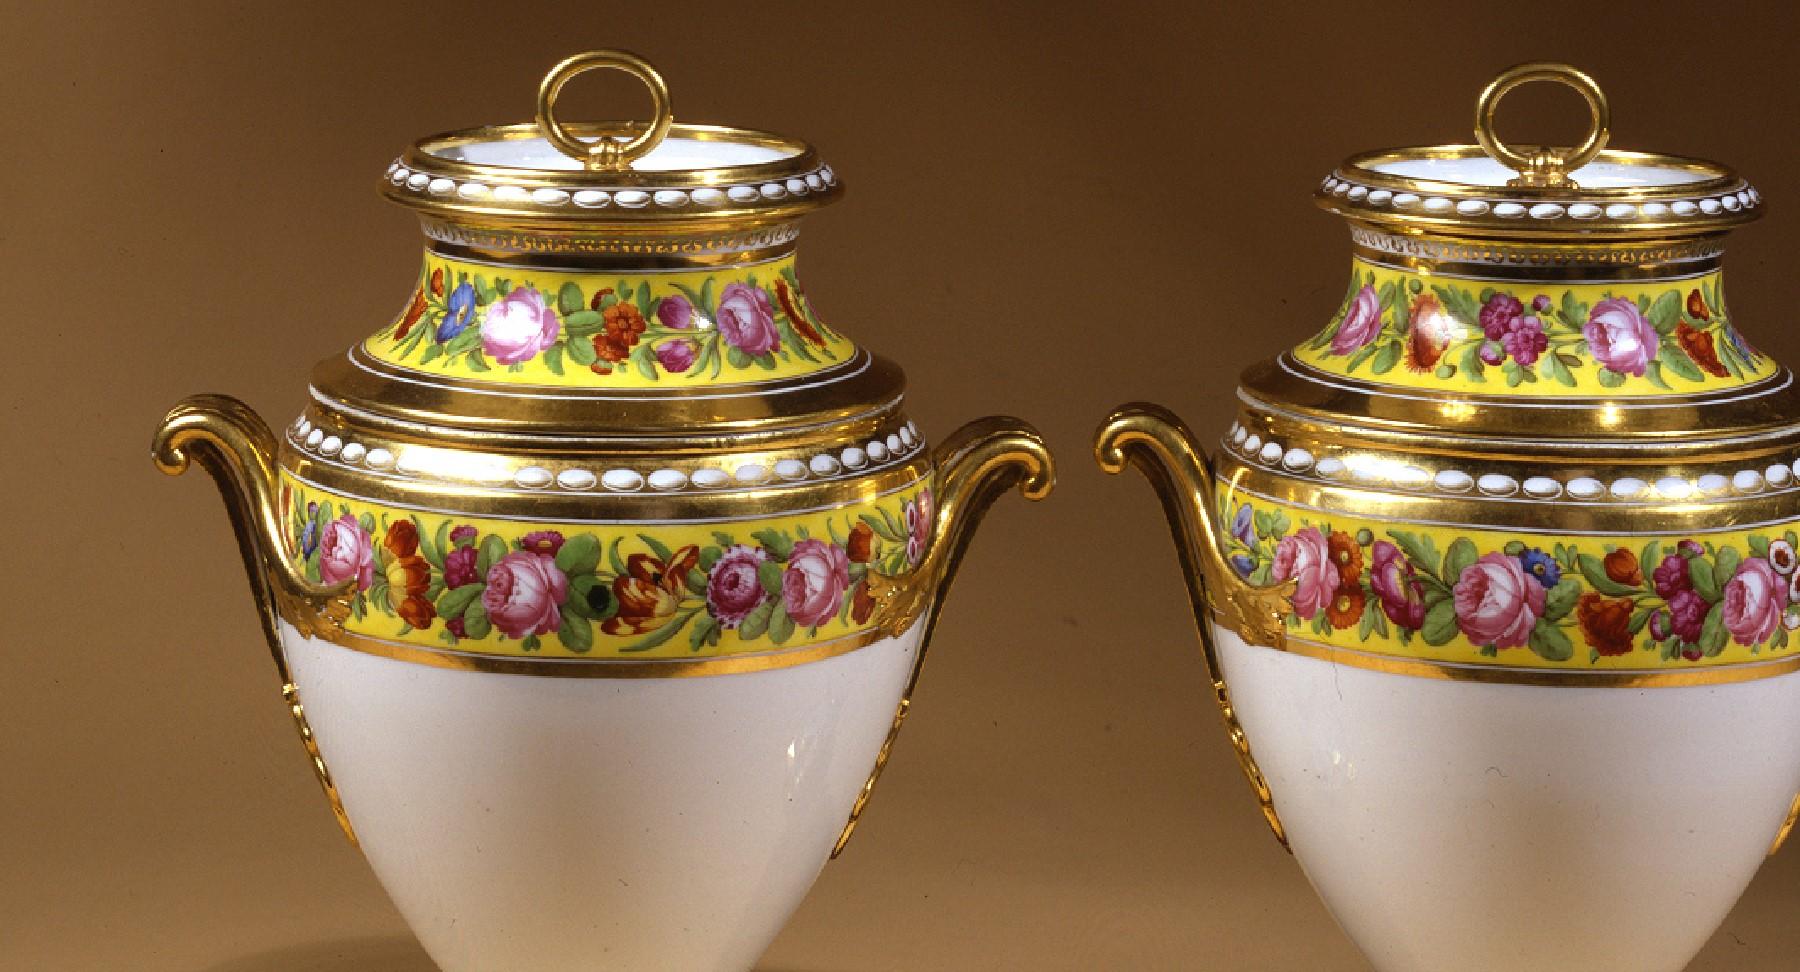 Empire Pair of “Old Paris” Porcelain Coolers, Yellow Bands, Floral Wreaths For Sale